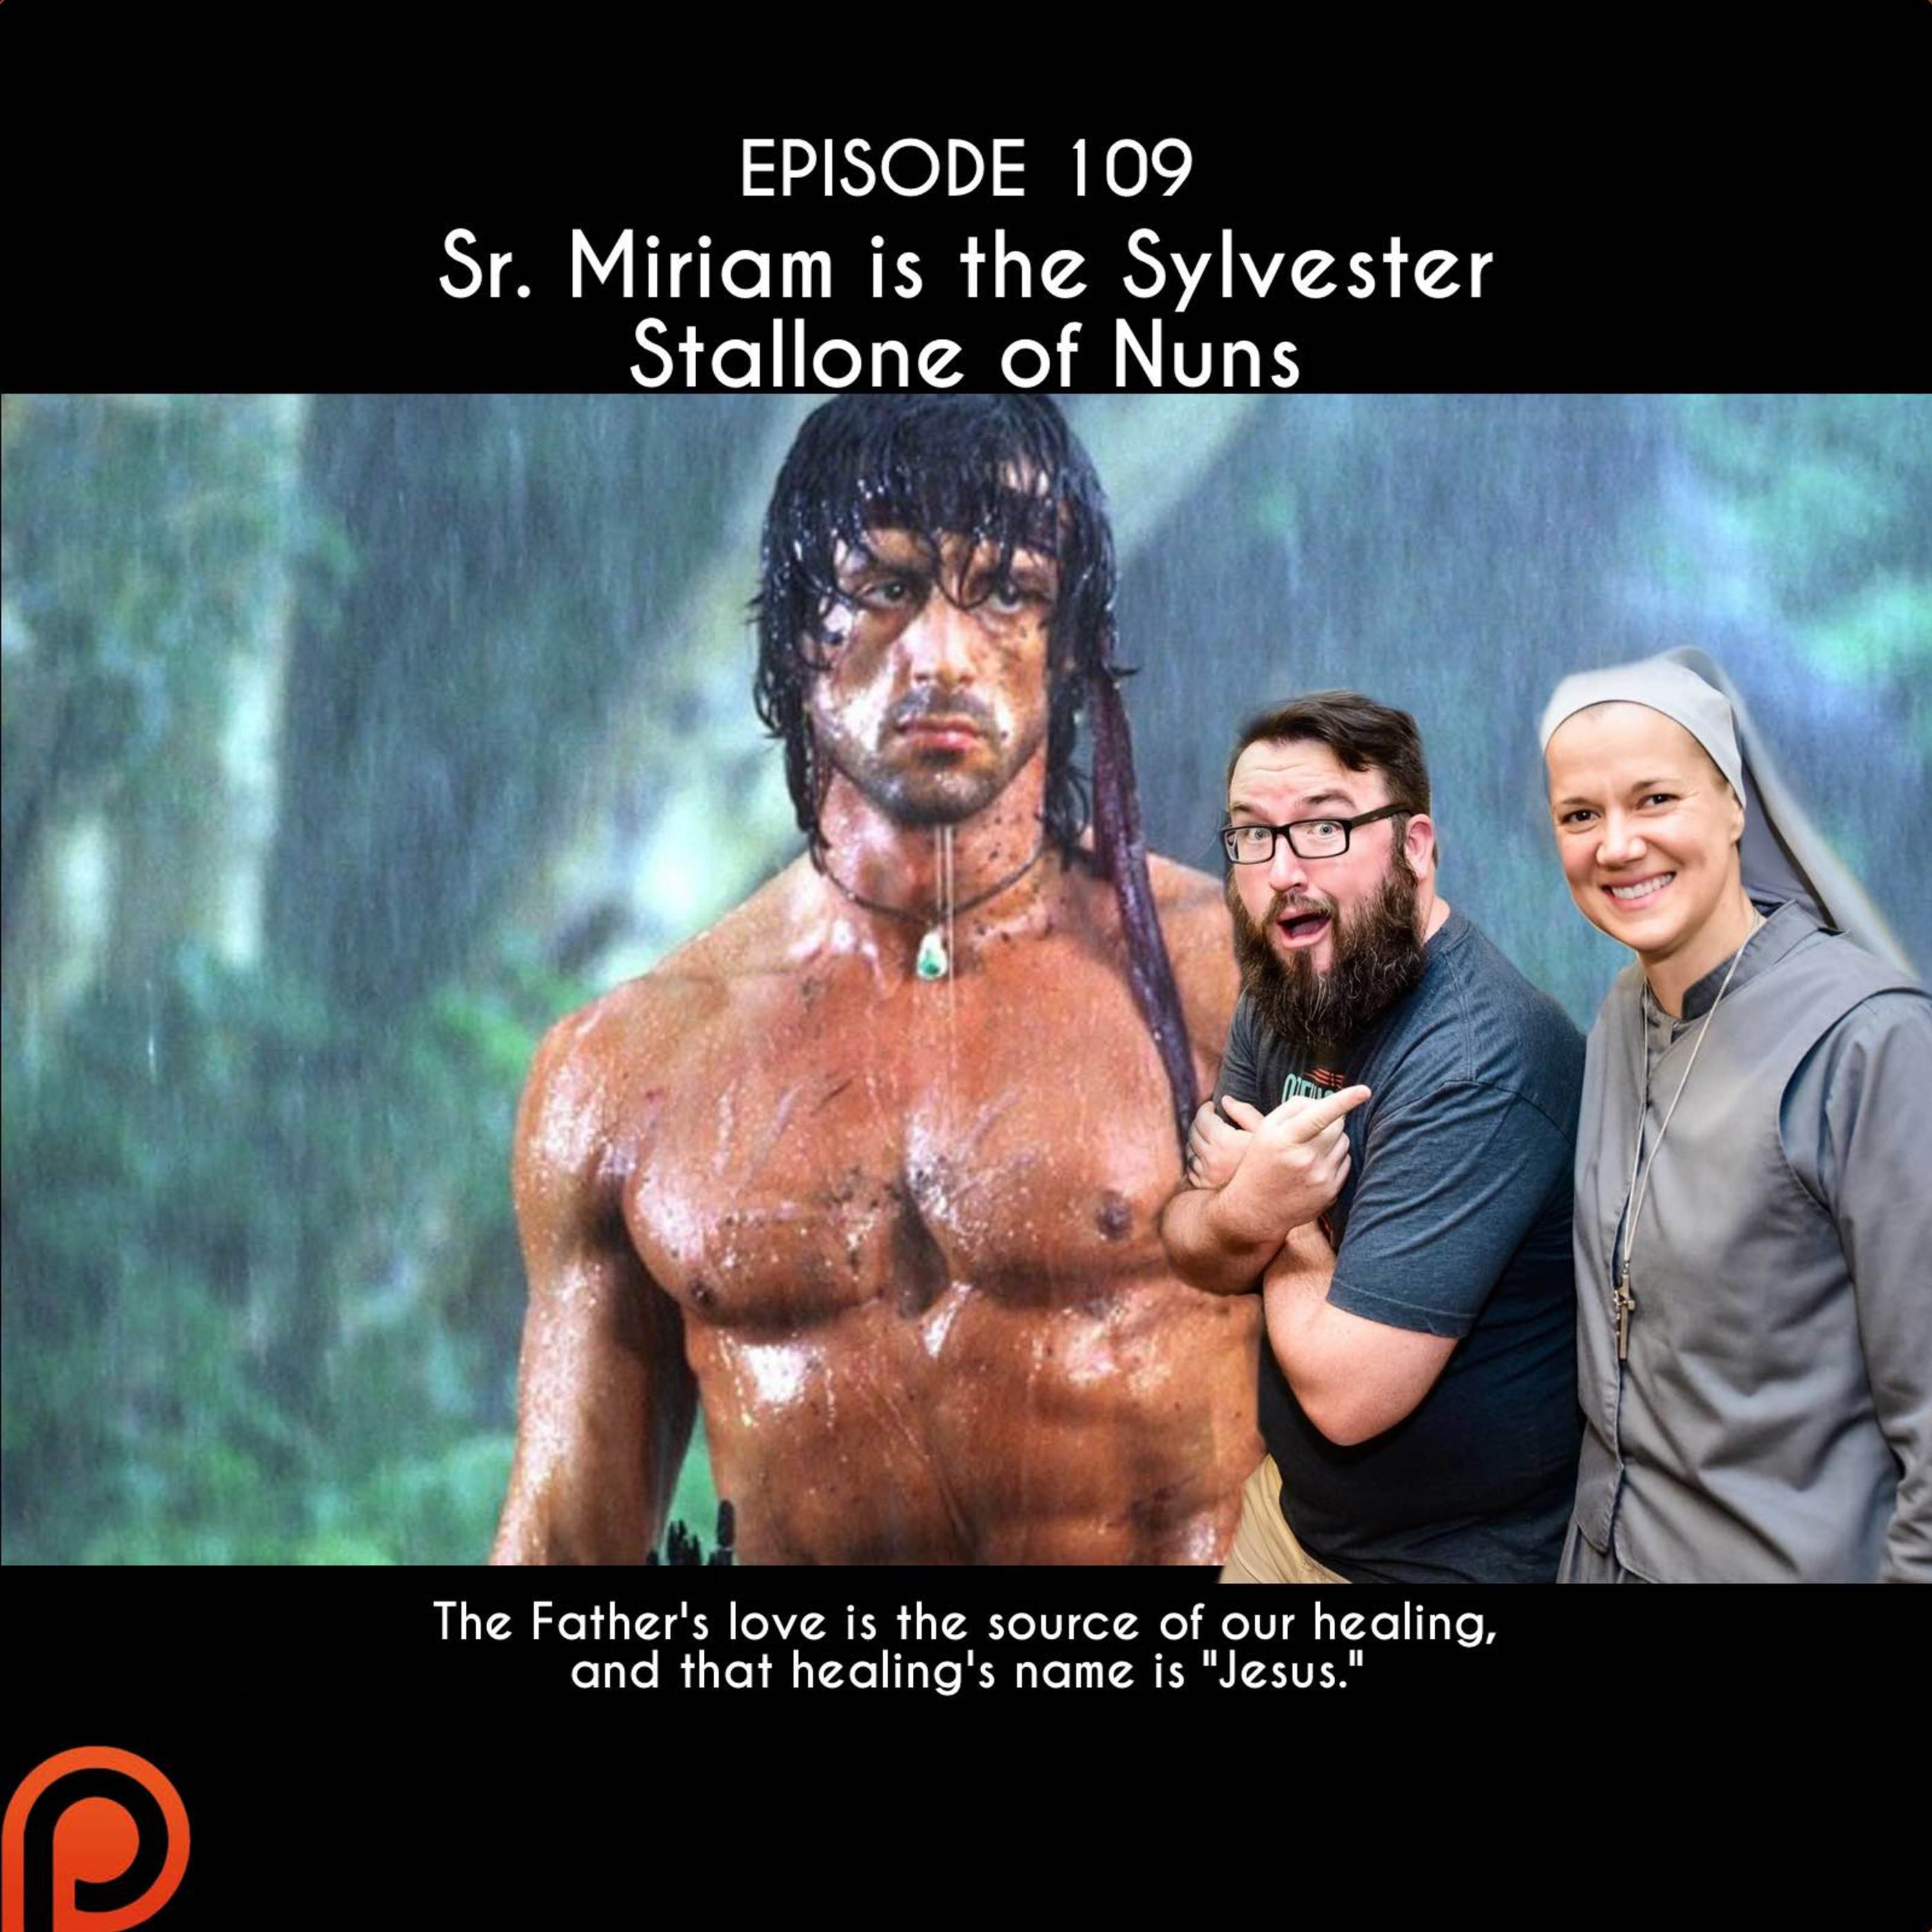 Episode 109: Sr. Miriam is the Sylvester Stallone of Nuns